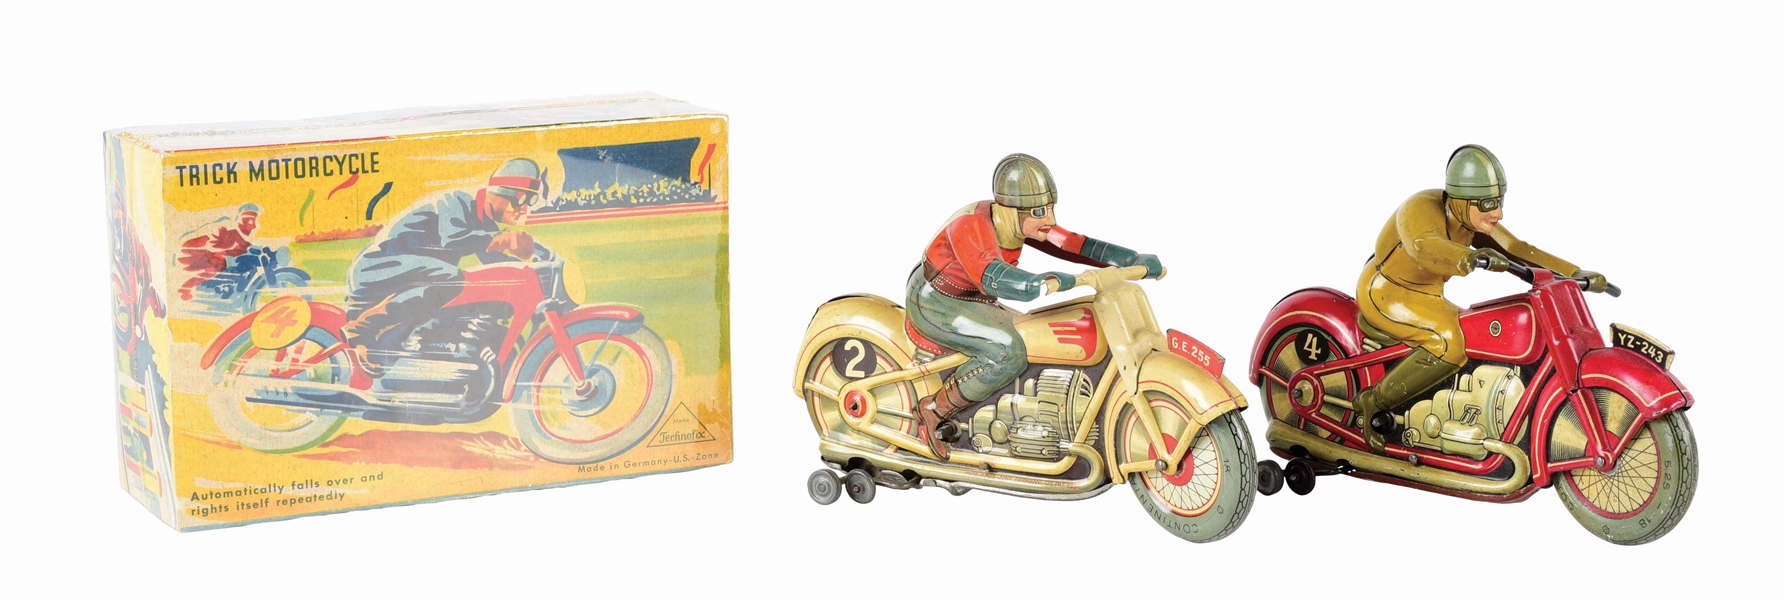 LOT OF 2: GERMAN TECHNOFIX LITHOGRAPHED WIND-UP MOTORCYCLE TOYS.